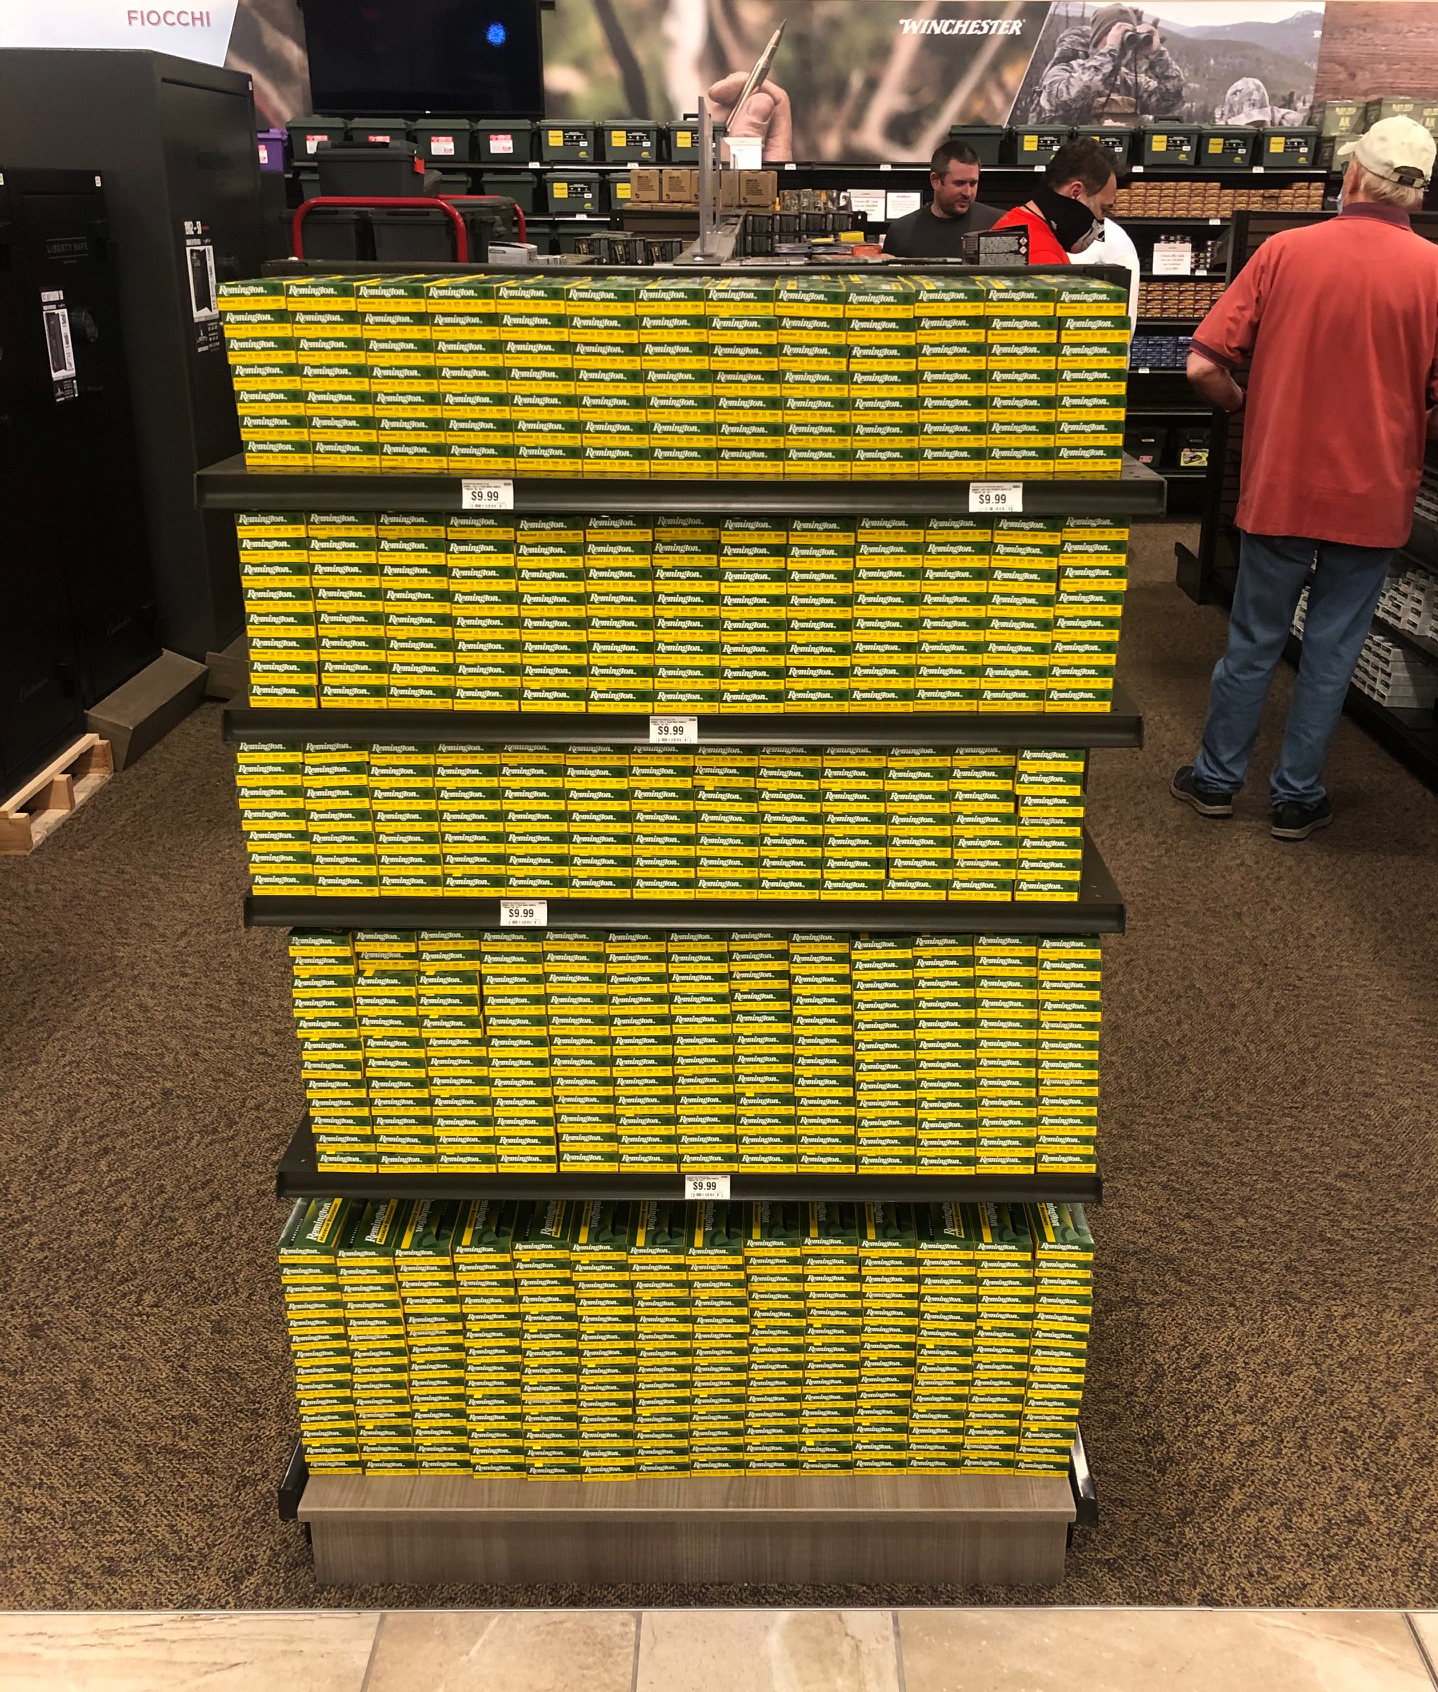 Remington ammo boxes on the shelves at a big box store in Texas.